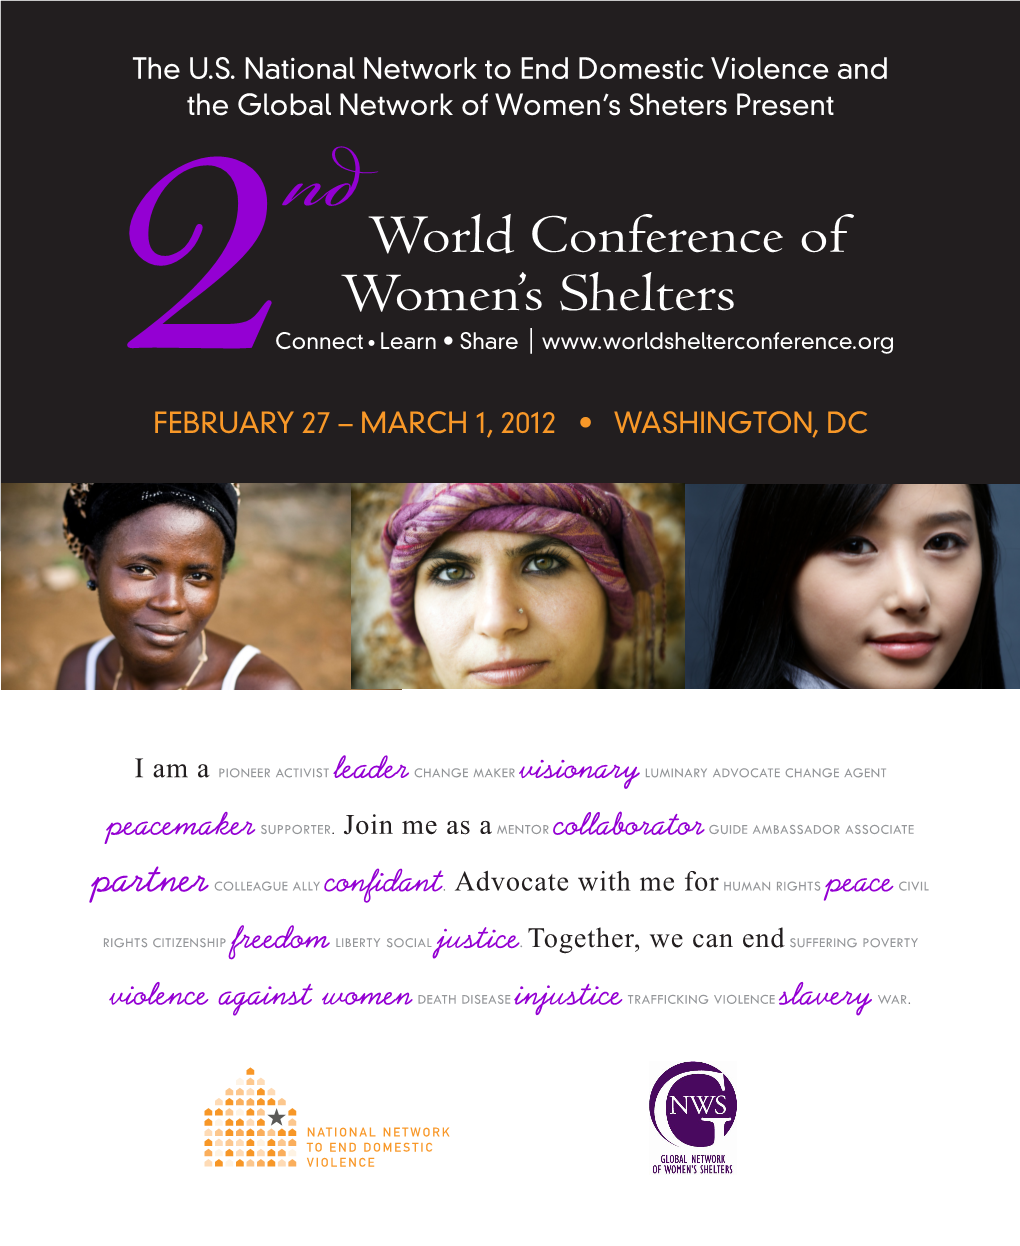 World Conference of Women's Shelters Agenda